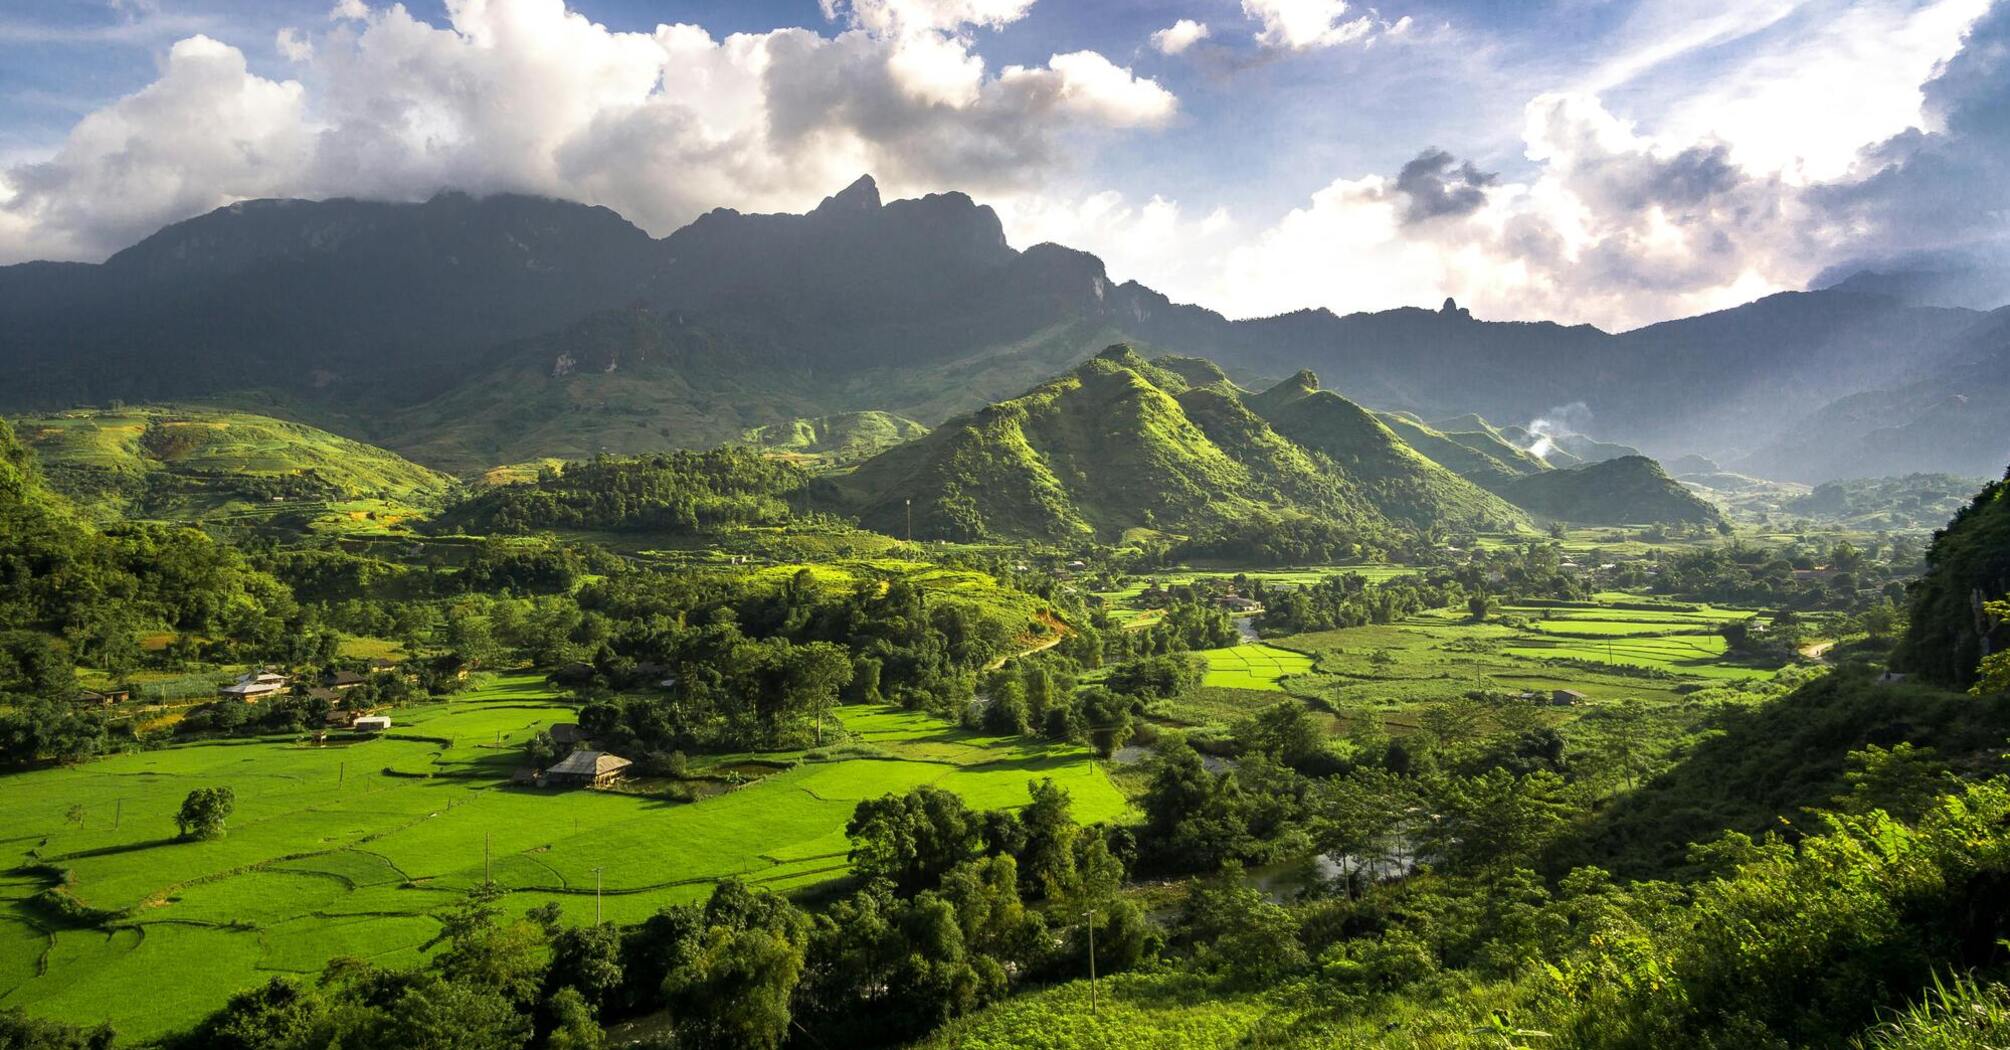 Lonely Planet has named Vietnam among the top 10 best travel